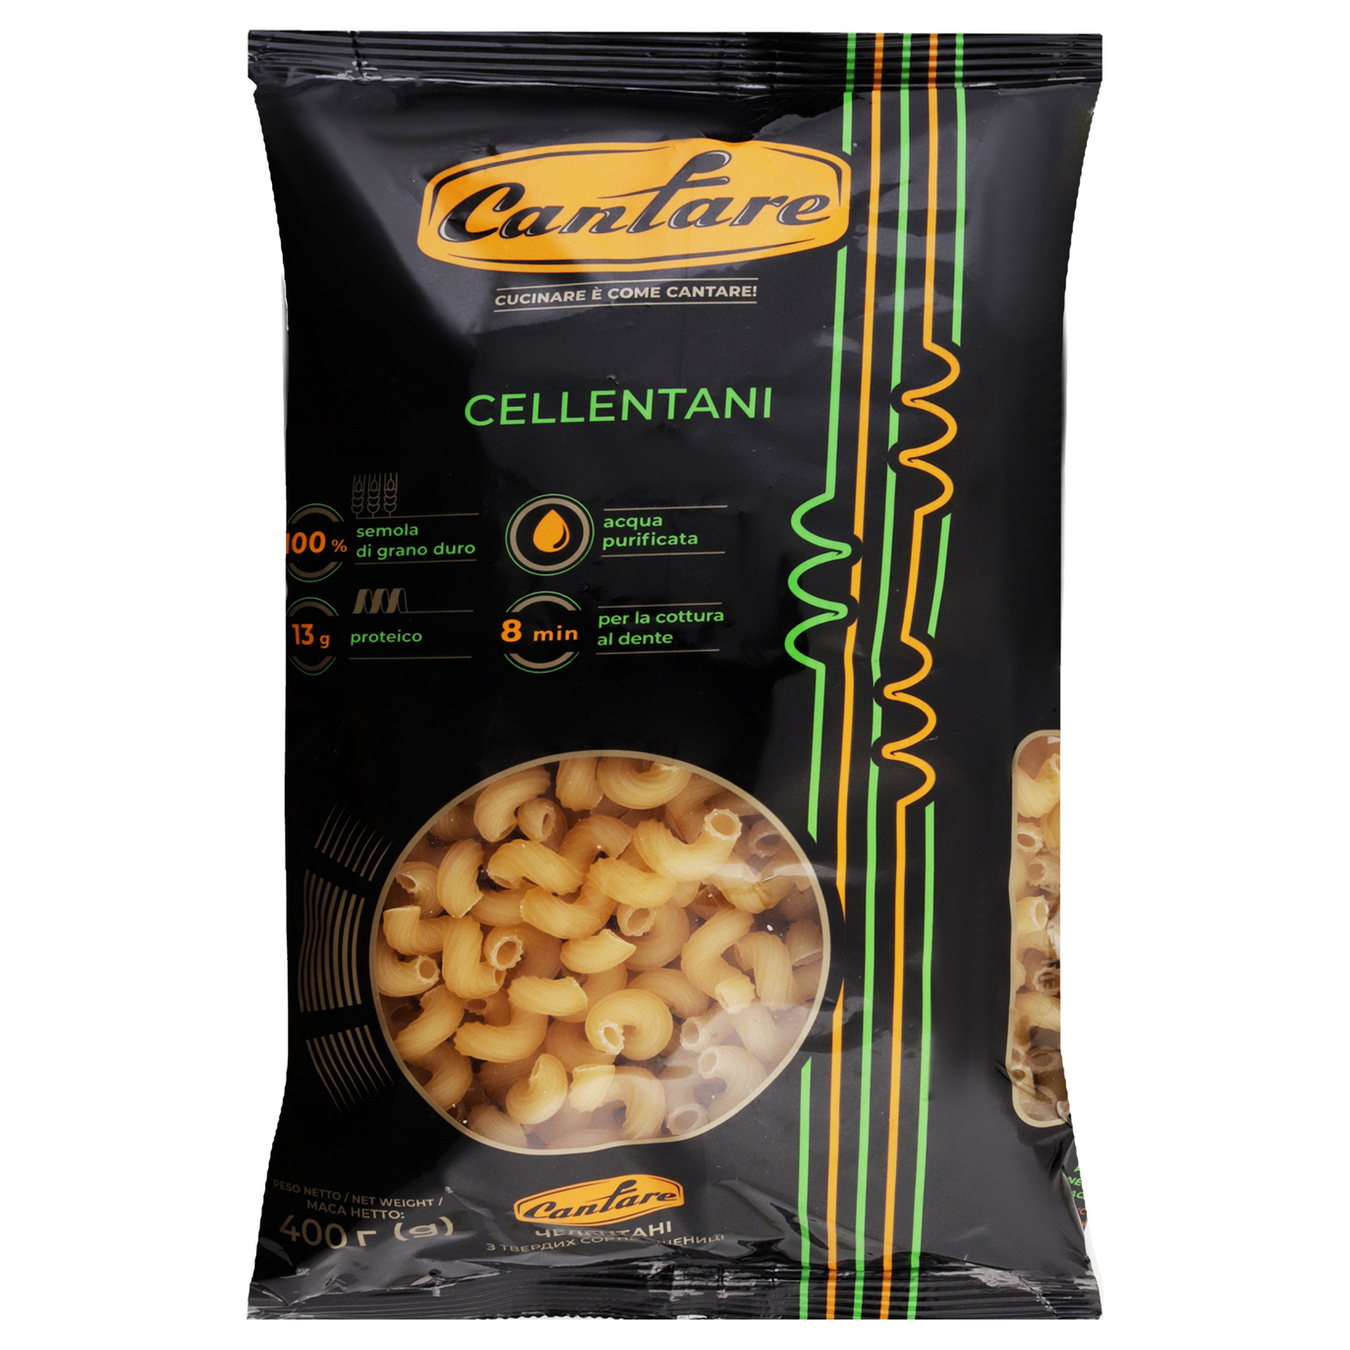 Cantare Cellentani pasta products 400g